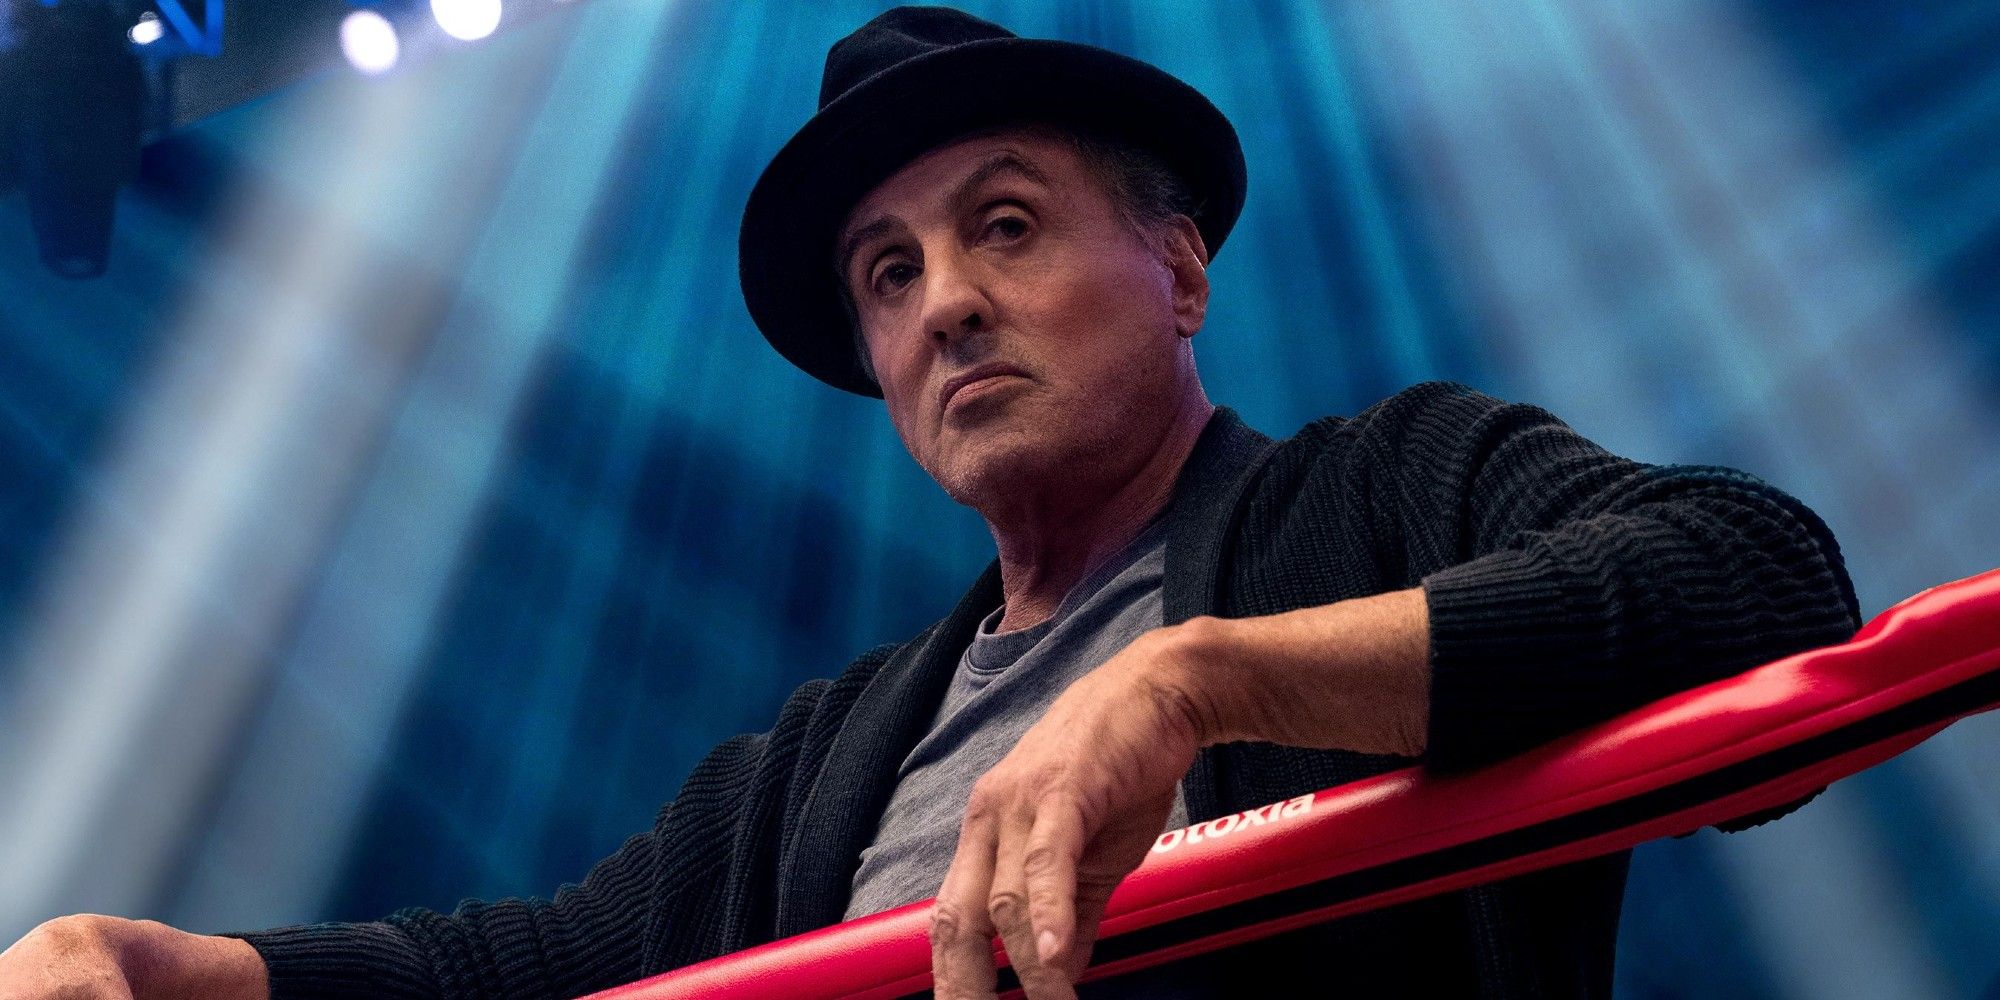 Sylvester Stallone hangs out on the top rope of a boxing ring in Creed 2